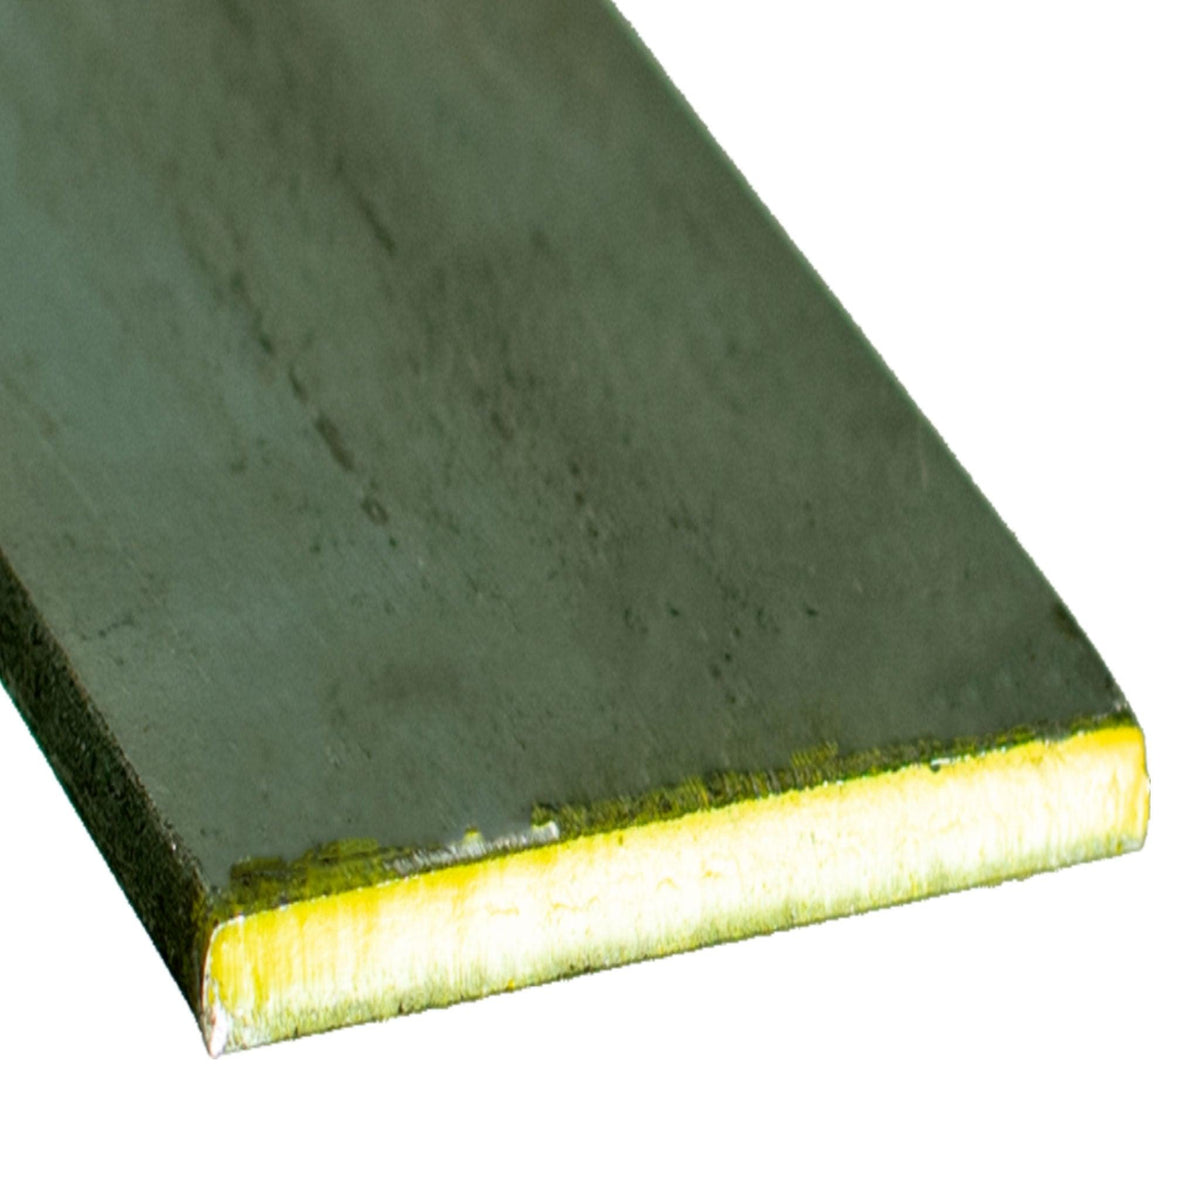 Hot Rolled Flat Bar Steel Raw Materials Sold at Lee Display - 1/2in X 3FT